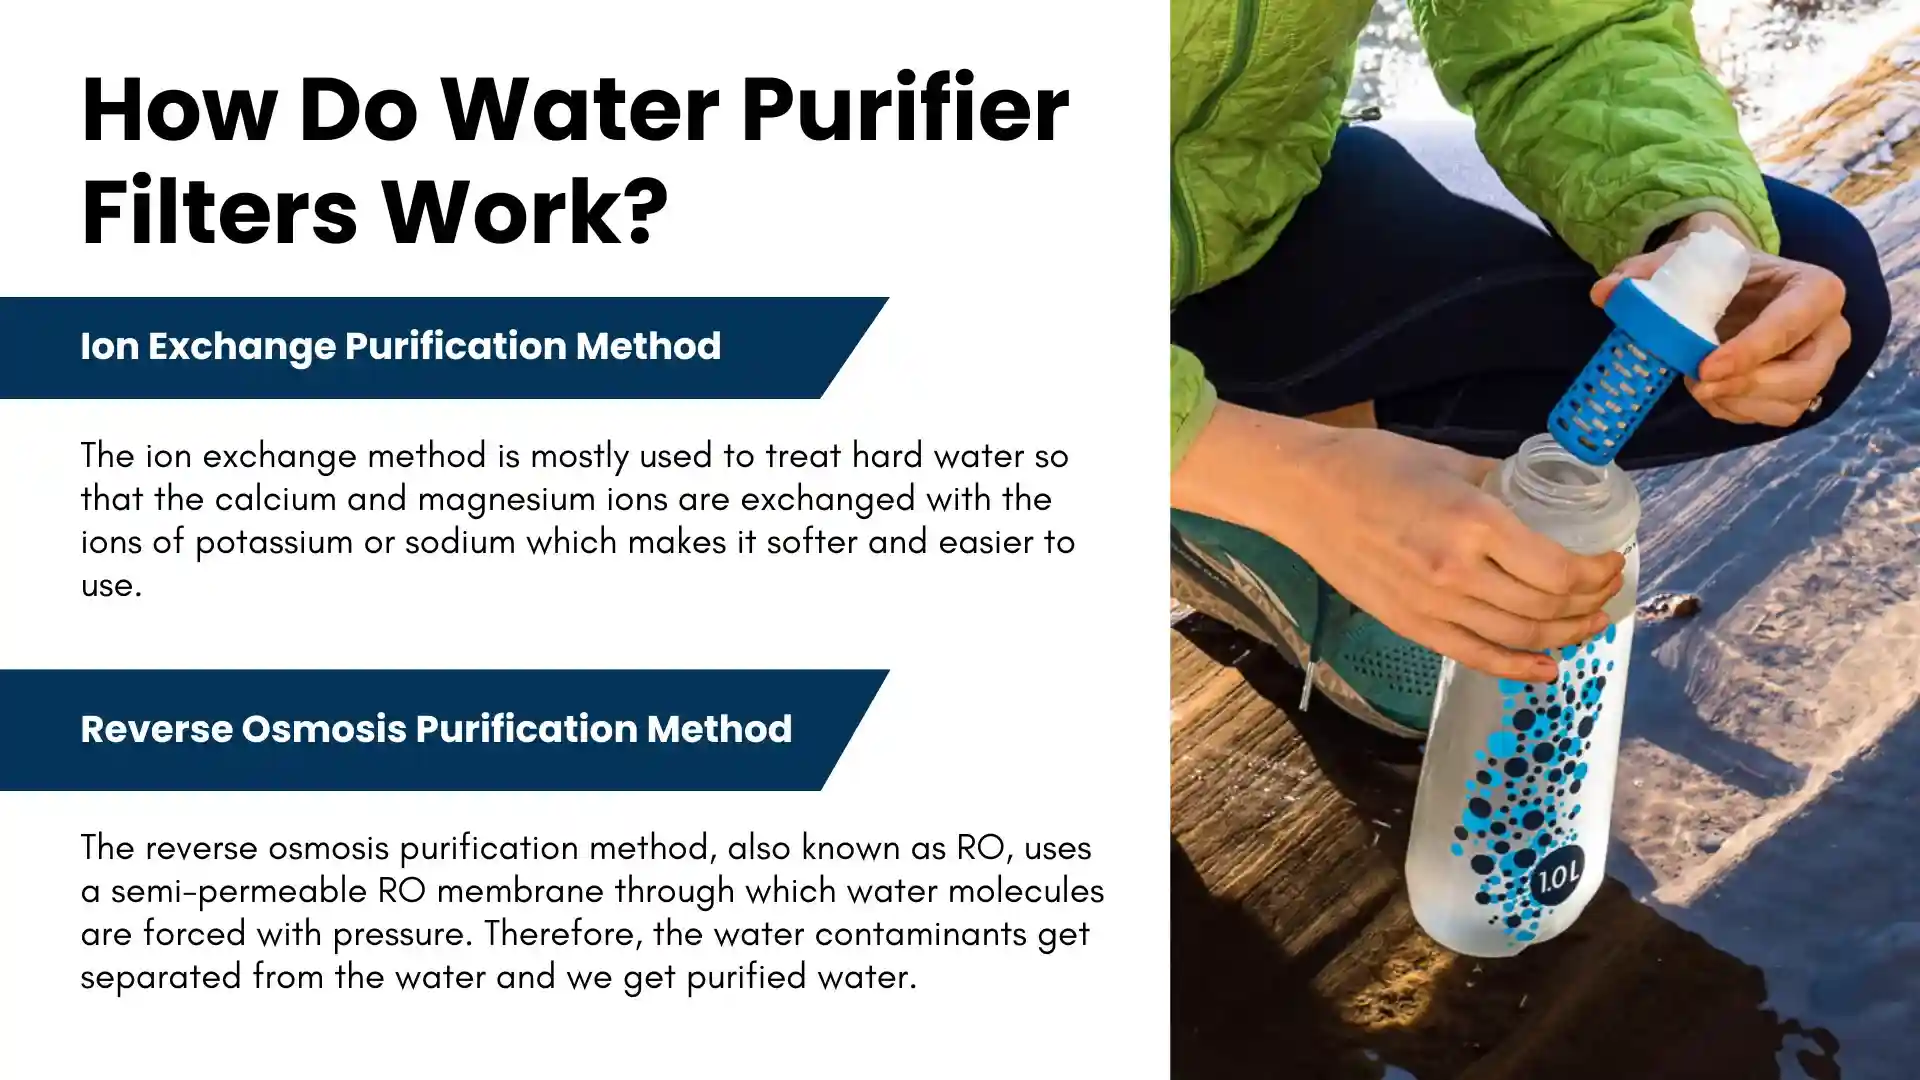 How Do Water Purifier Filters Work